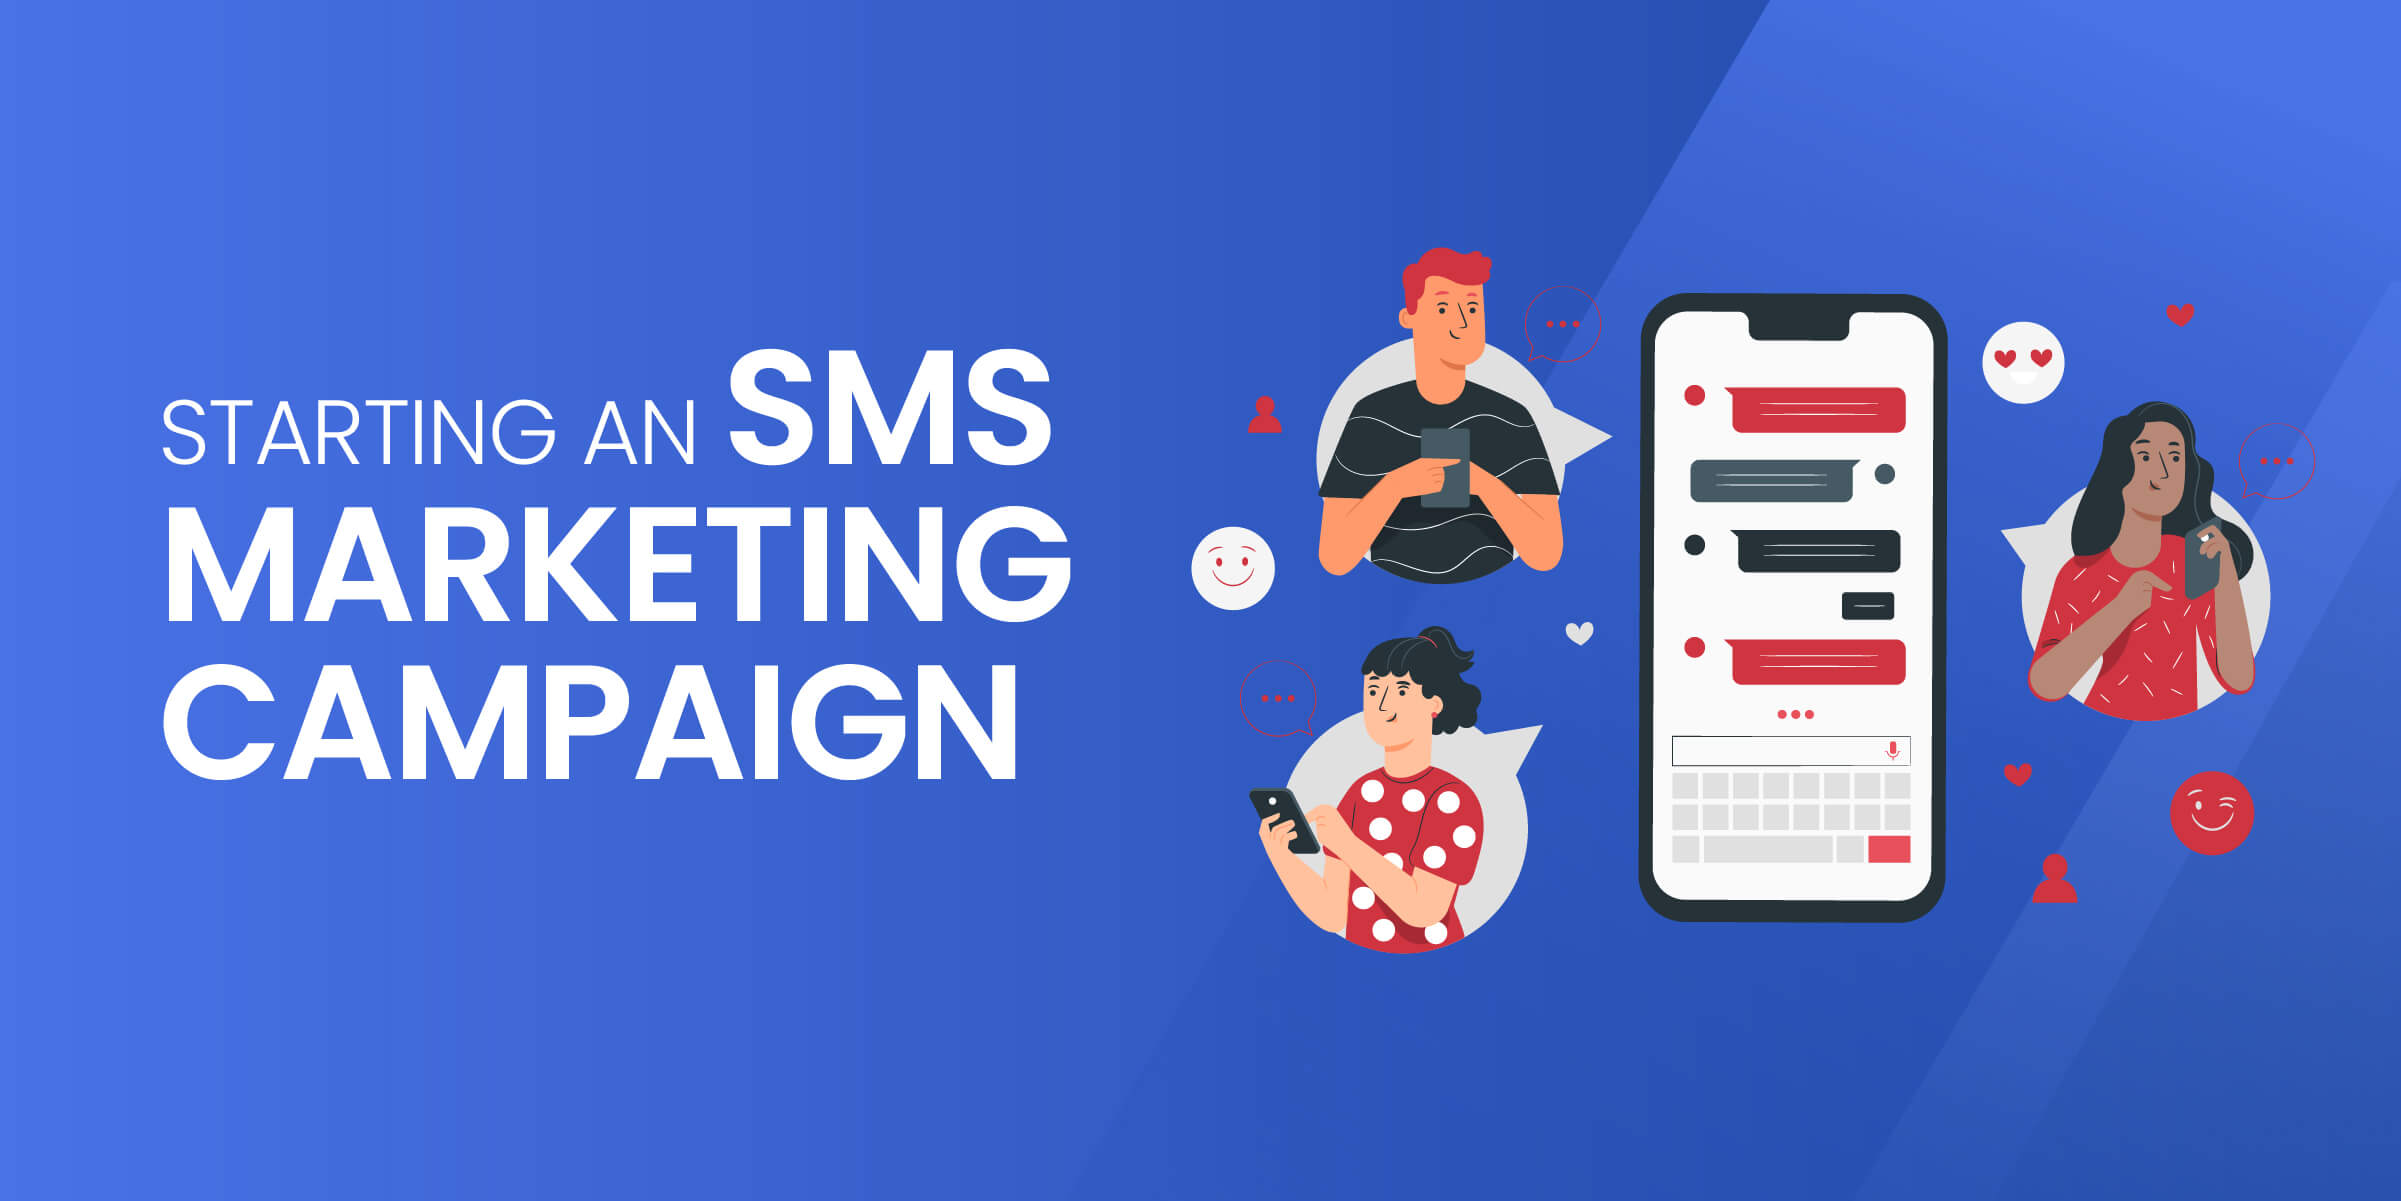 Starting an SMS Marketing Campaign